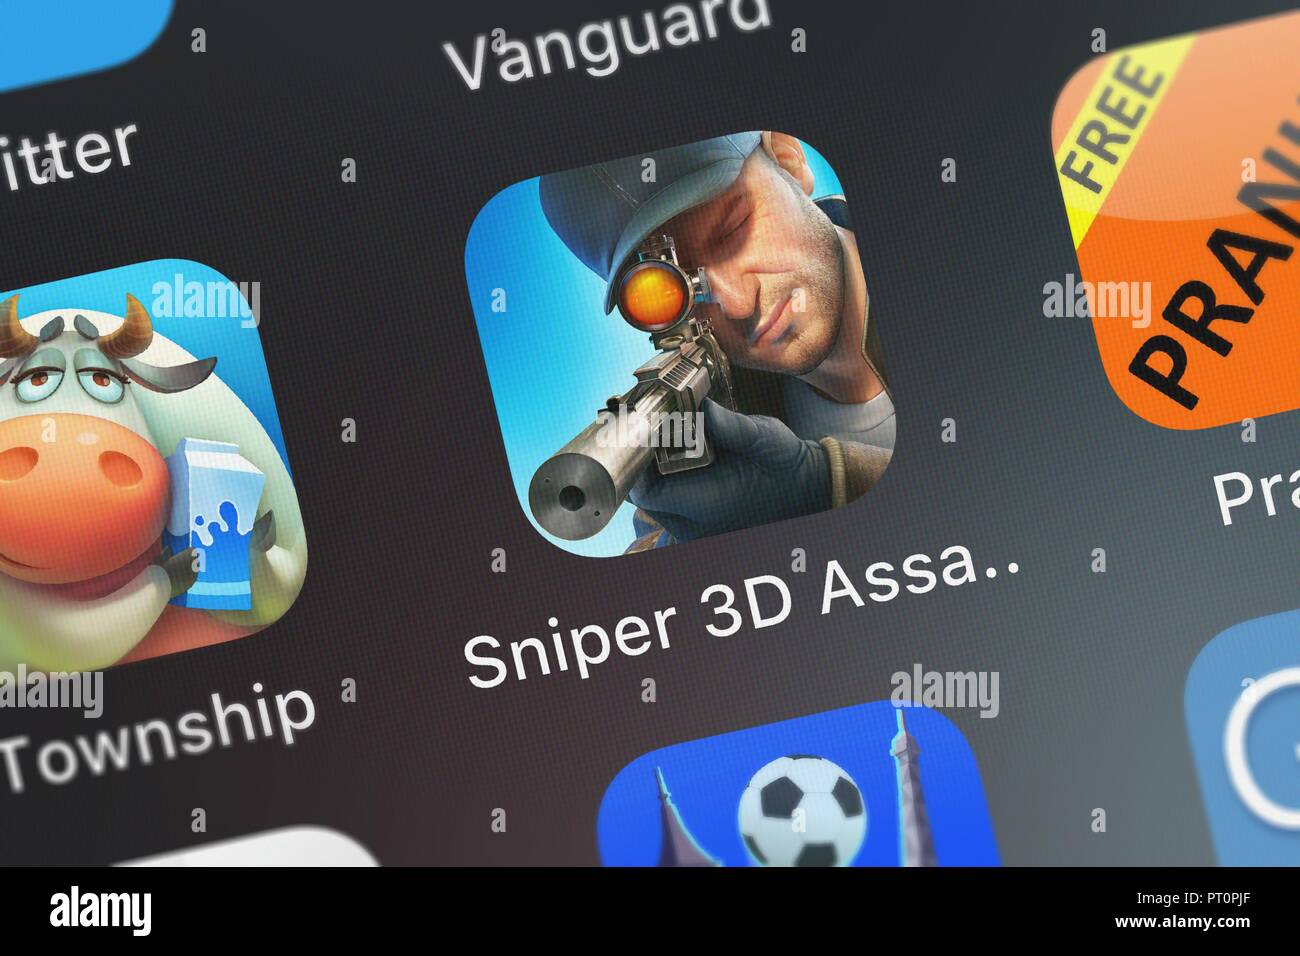 Sniper 3d Assassin High Resolution Stock Photography and Images - Alamy